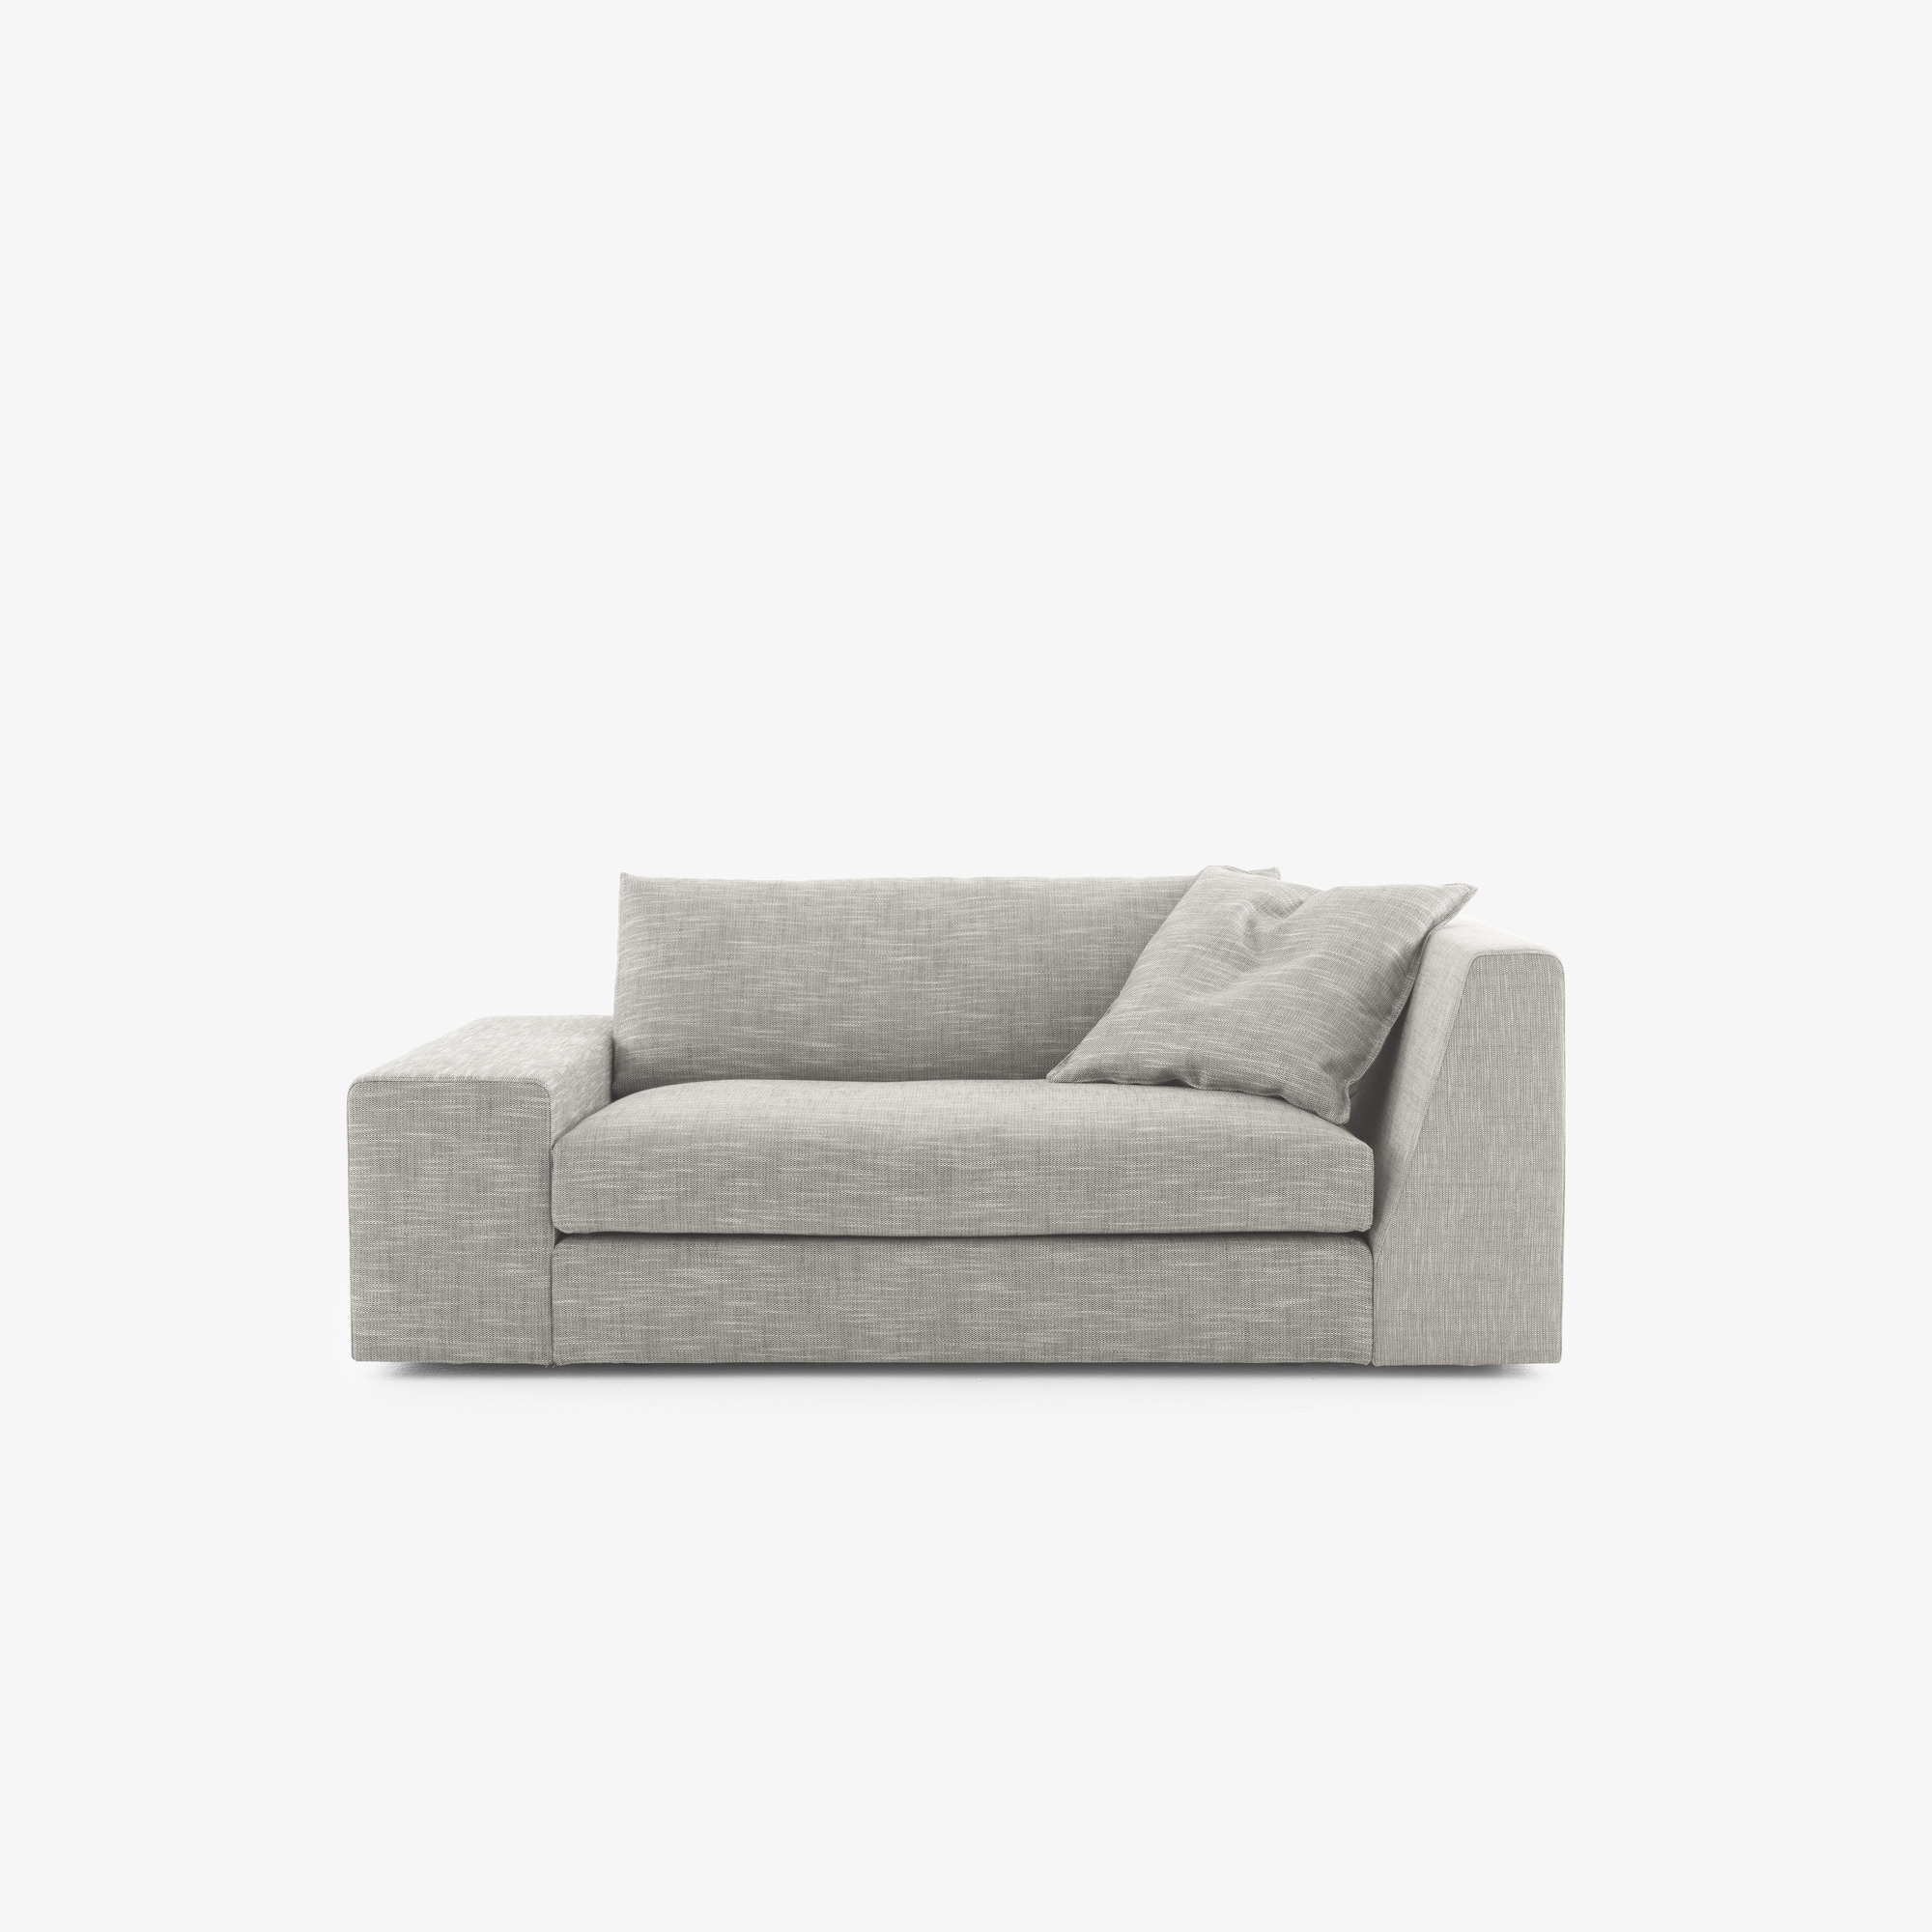 Image SMALL ASYMMETRICAL SETTEE COMPLETE ITEM